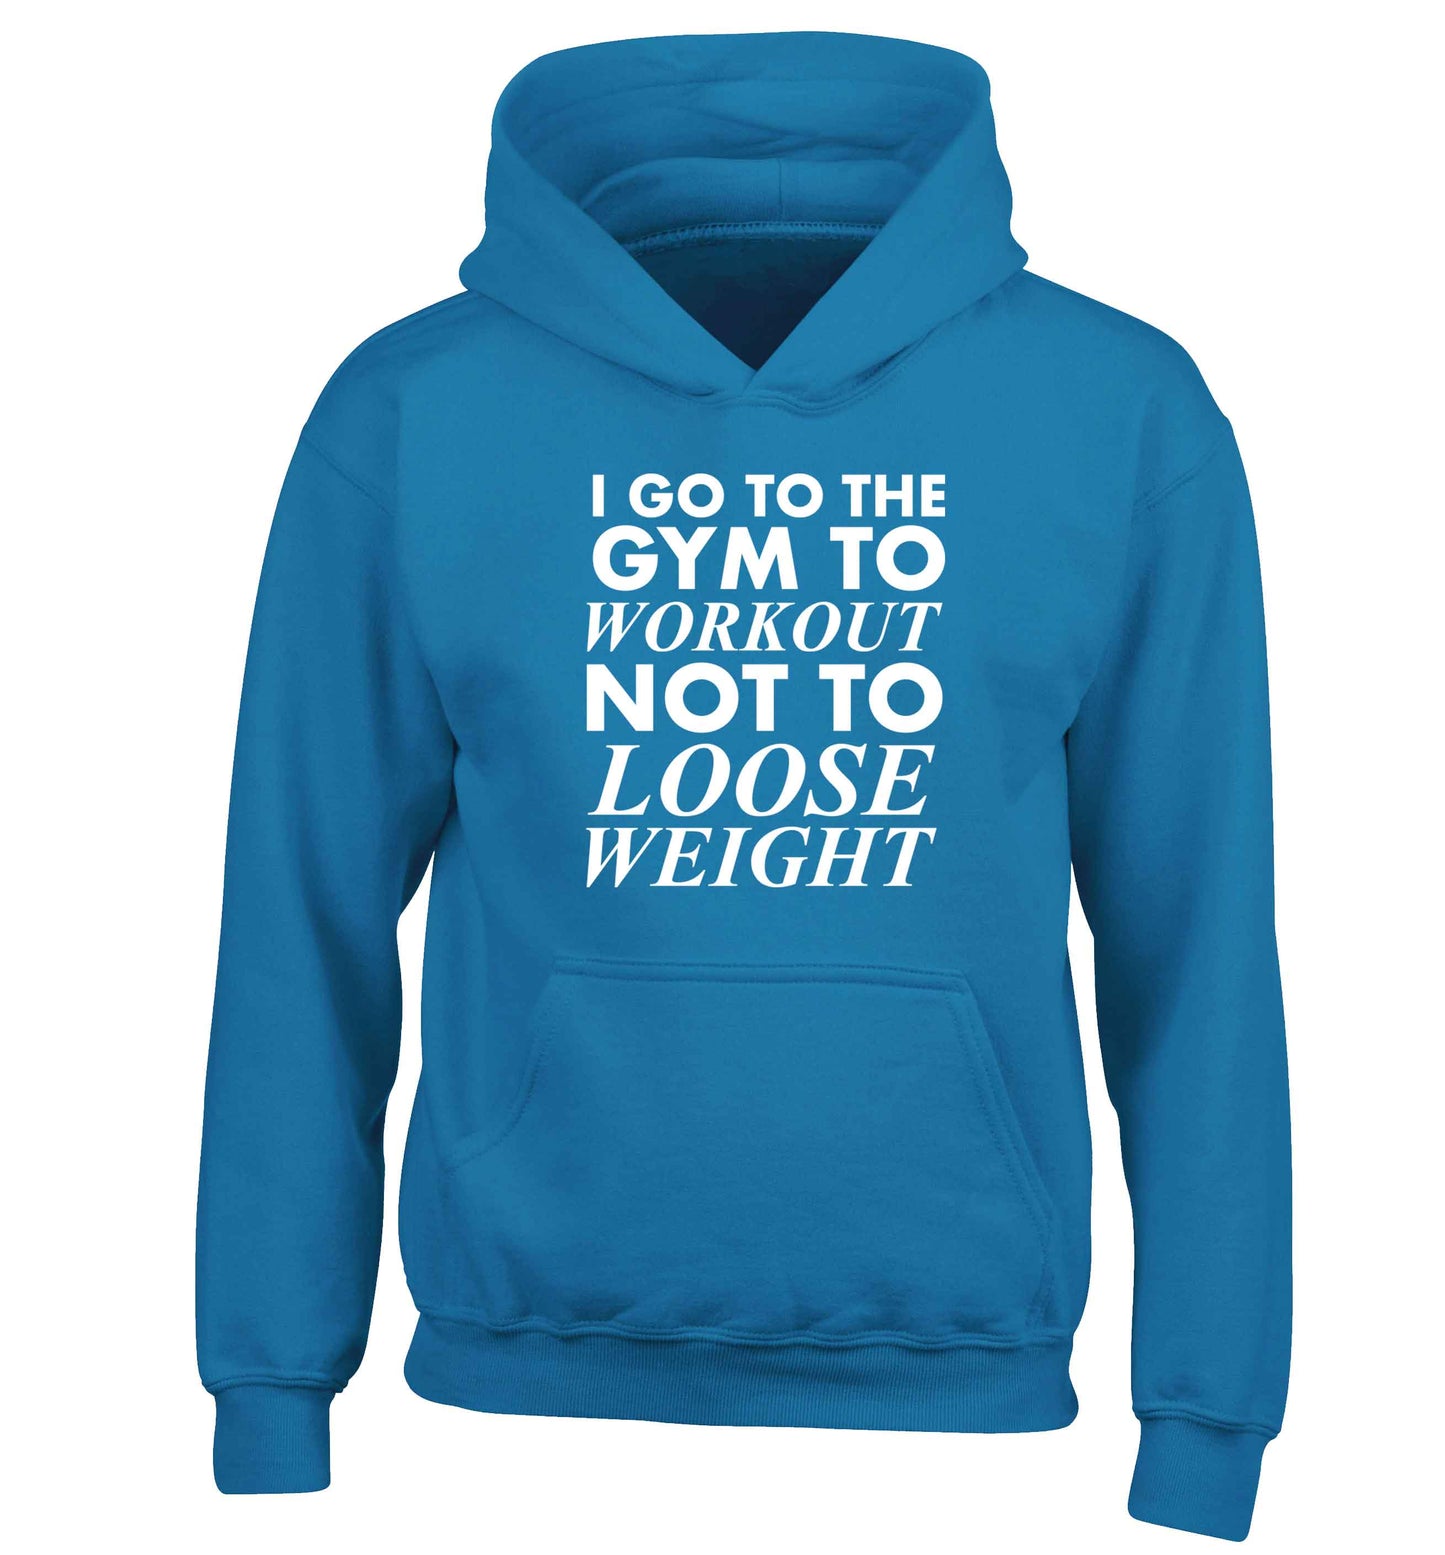 I go to the gym to workout not to loose weight children's blue hoodie 12-13 Years